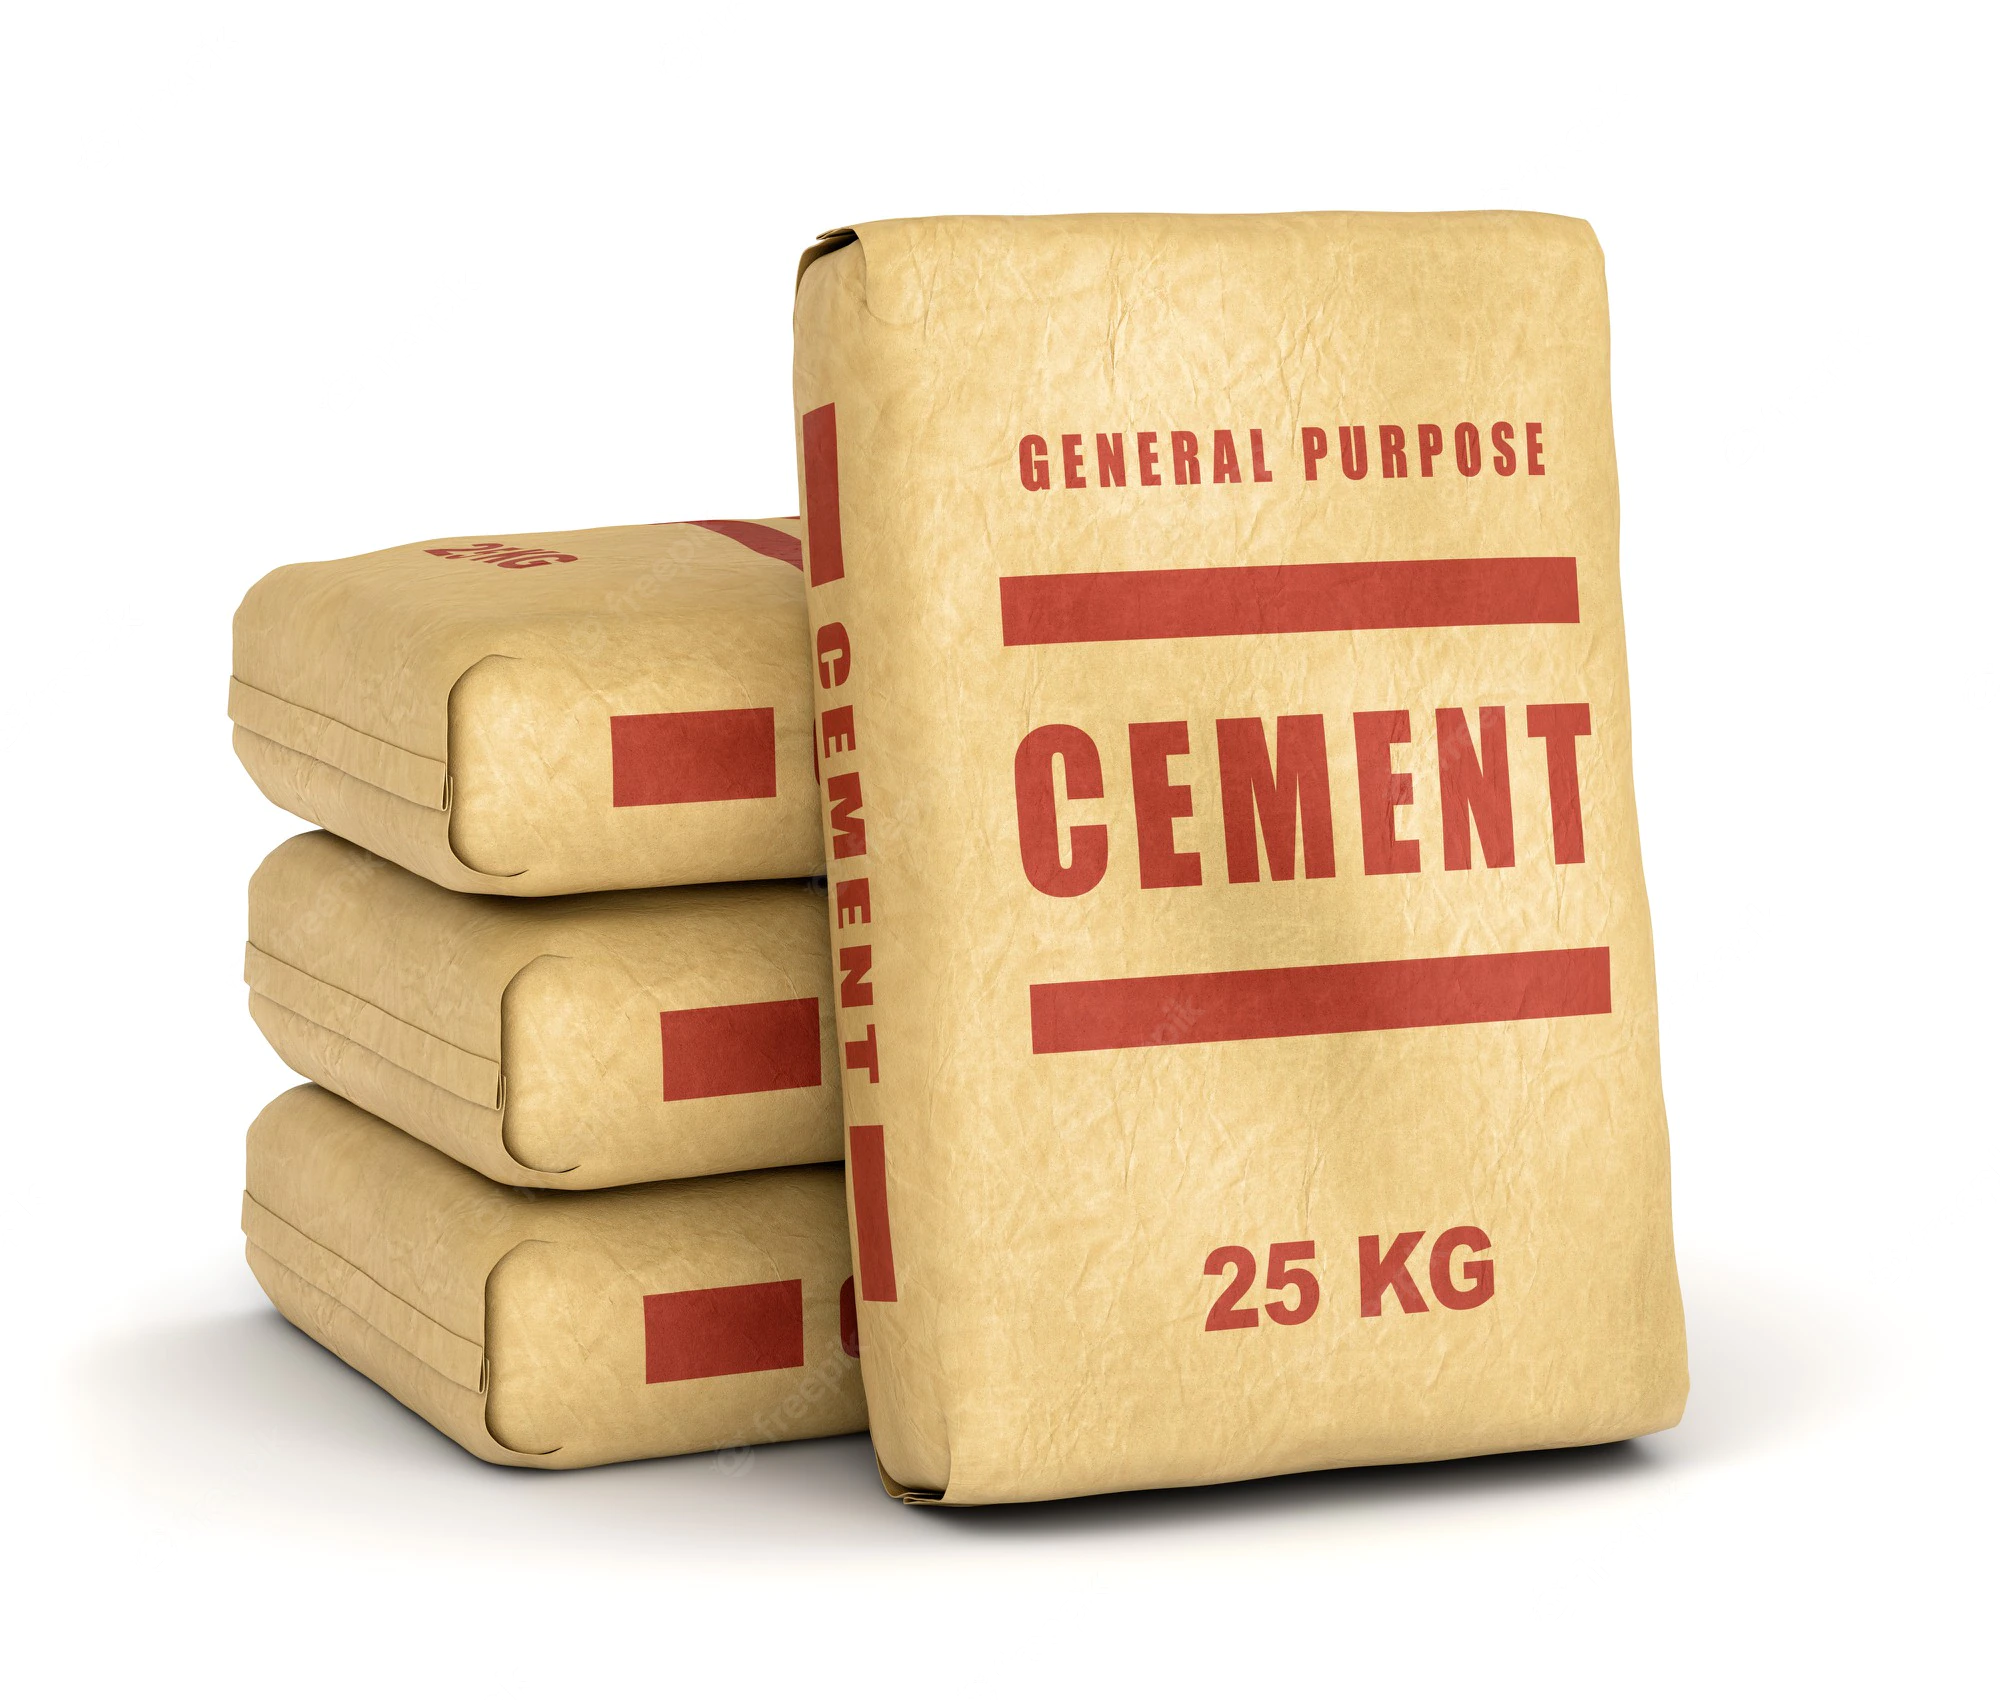 cement-bags-paper-sacks-isolated-white-background_104576-214